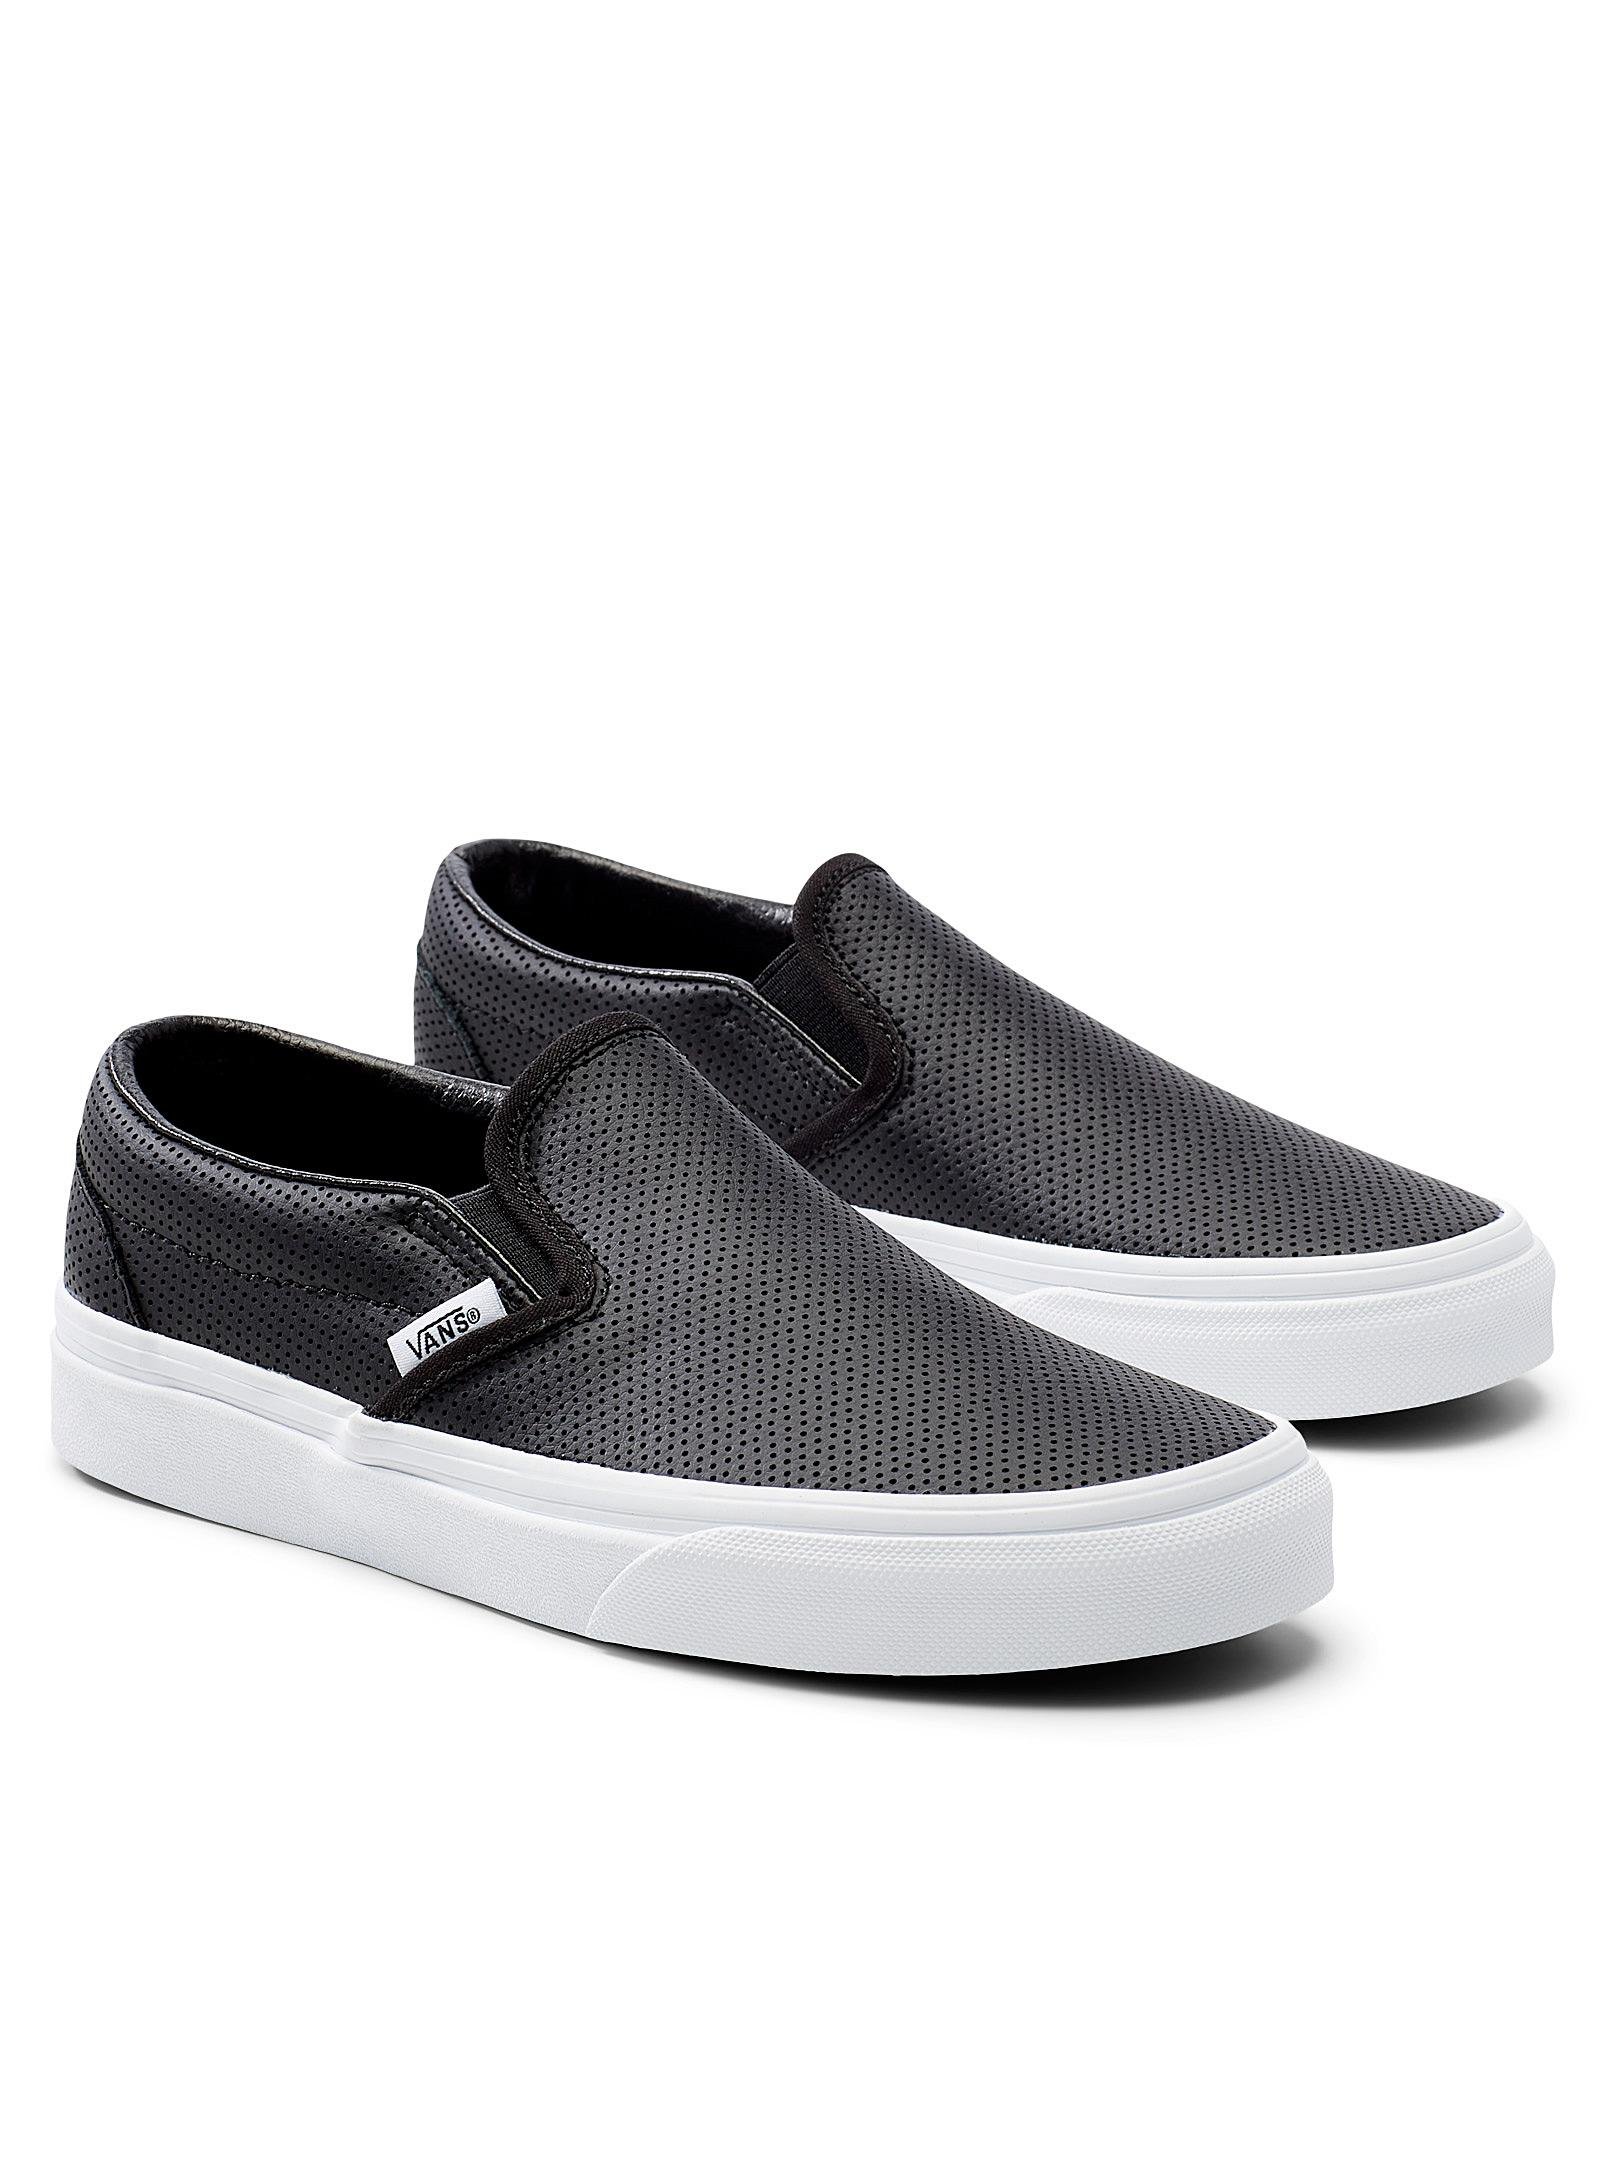 Vans Perforated Leather Slip |